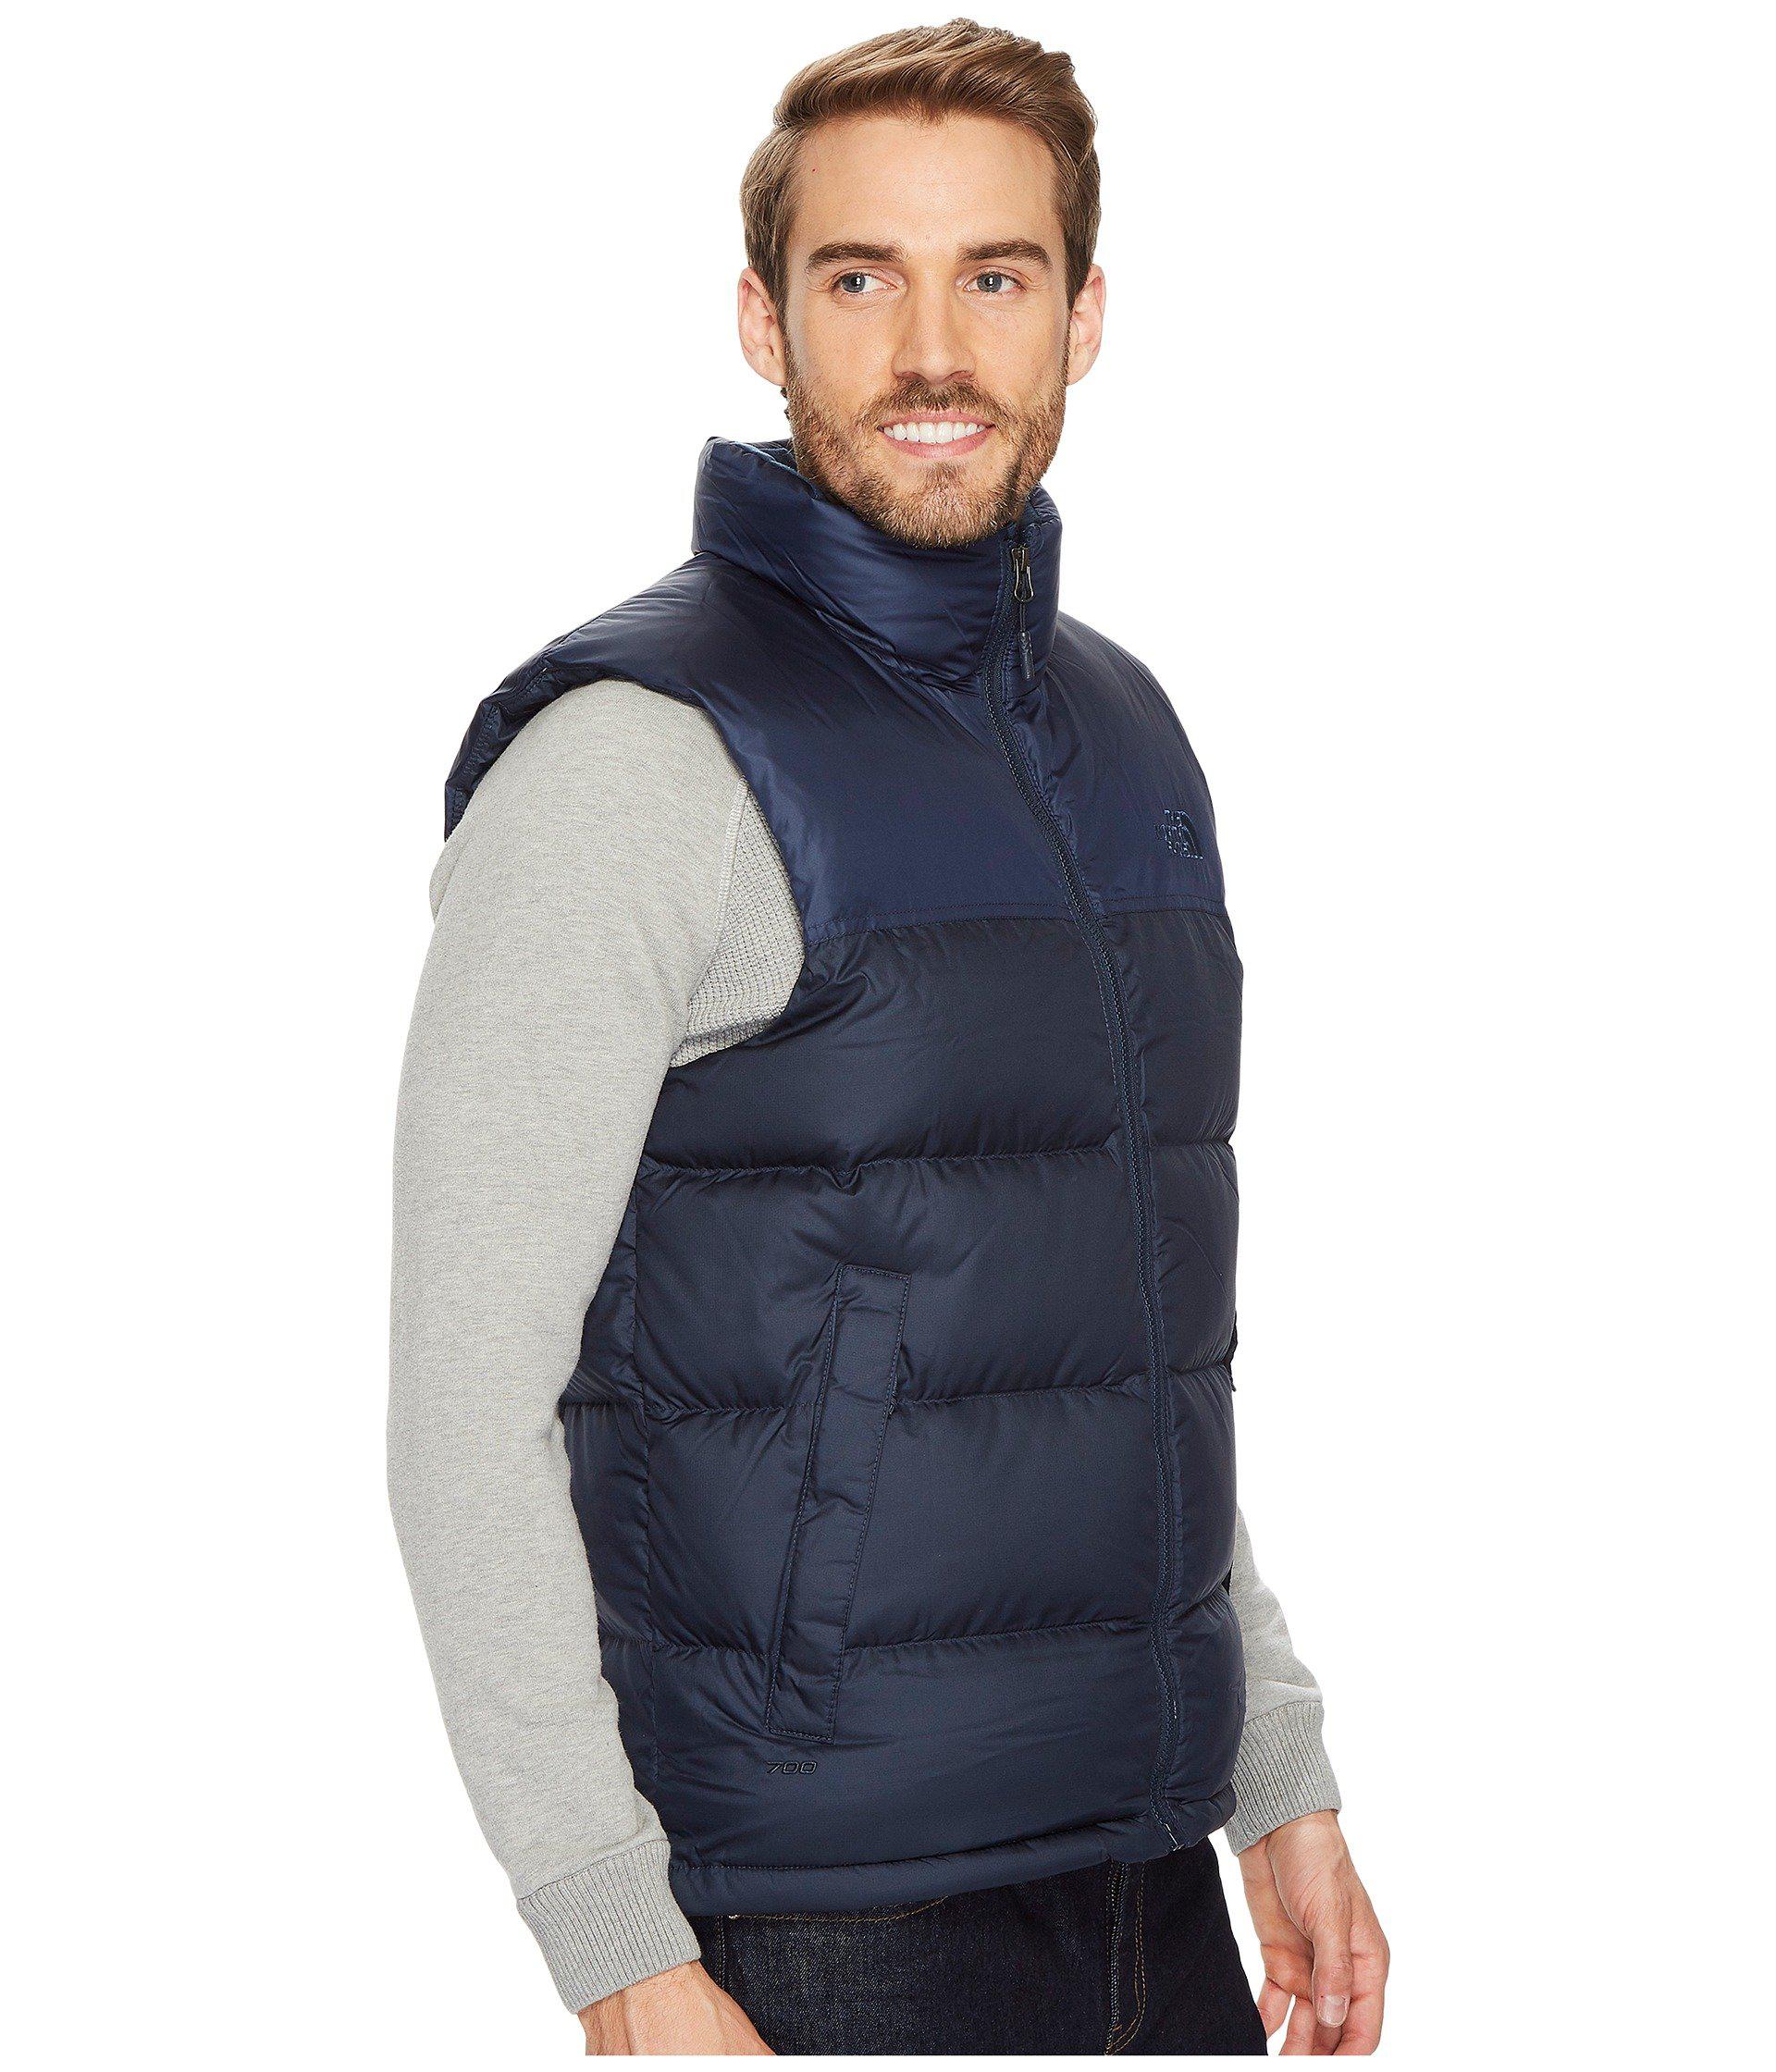 The North Face Goose Nuptse Vest in Blue for Men - Lyst